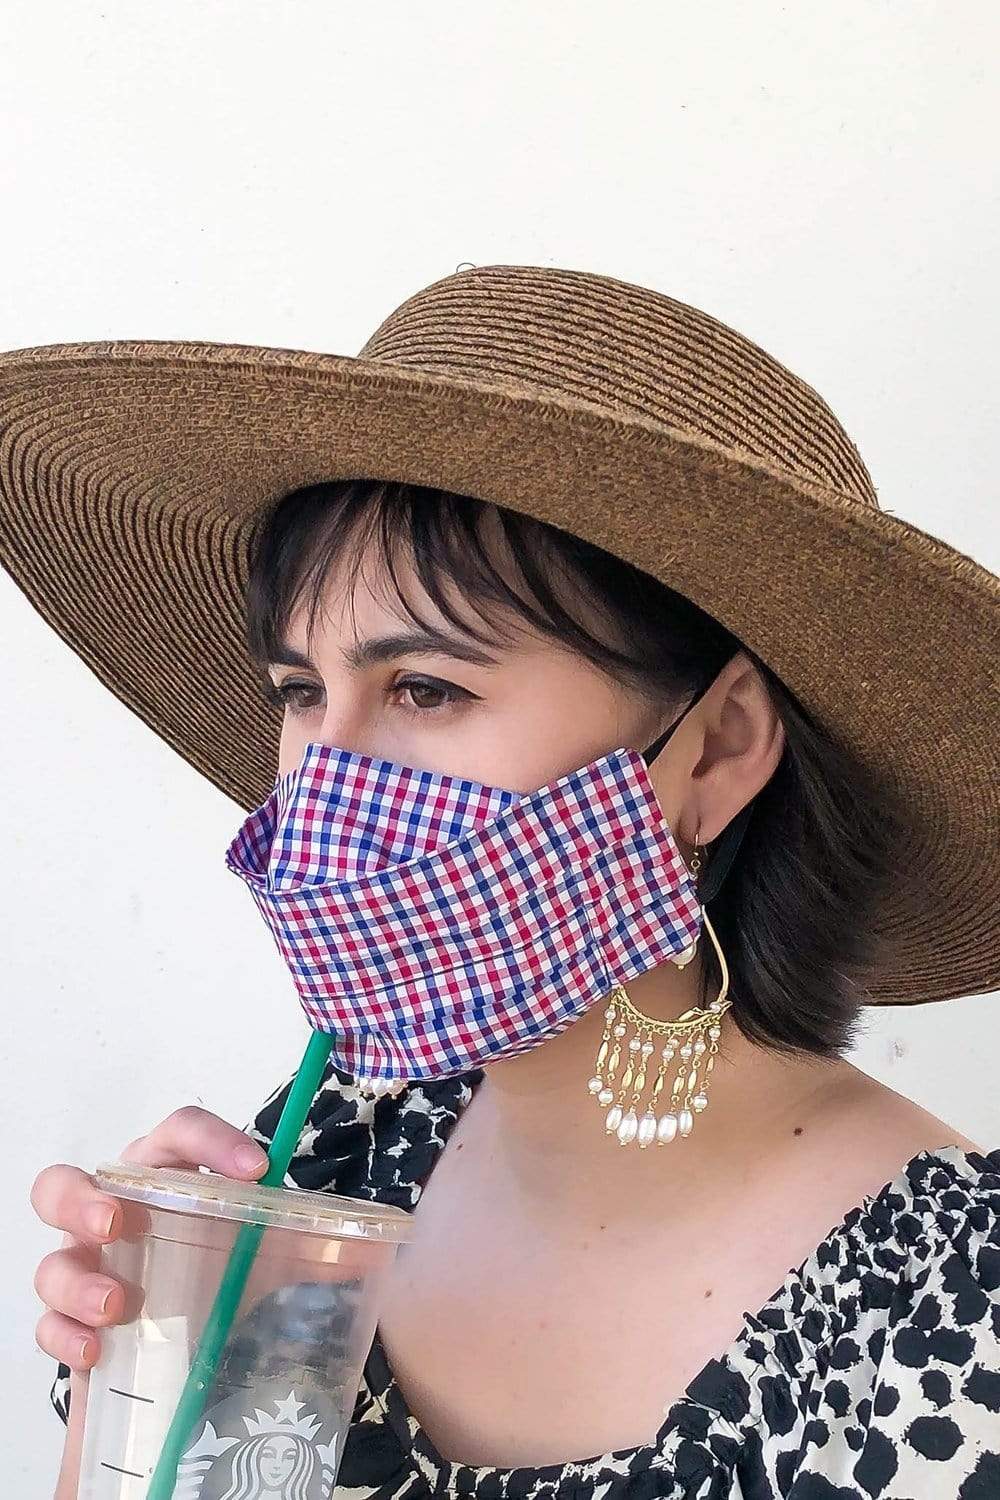 Safely Sip Face Masks Safely Sip Mask in Red Deco Diamond Print - Chloe Dao